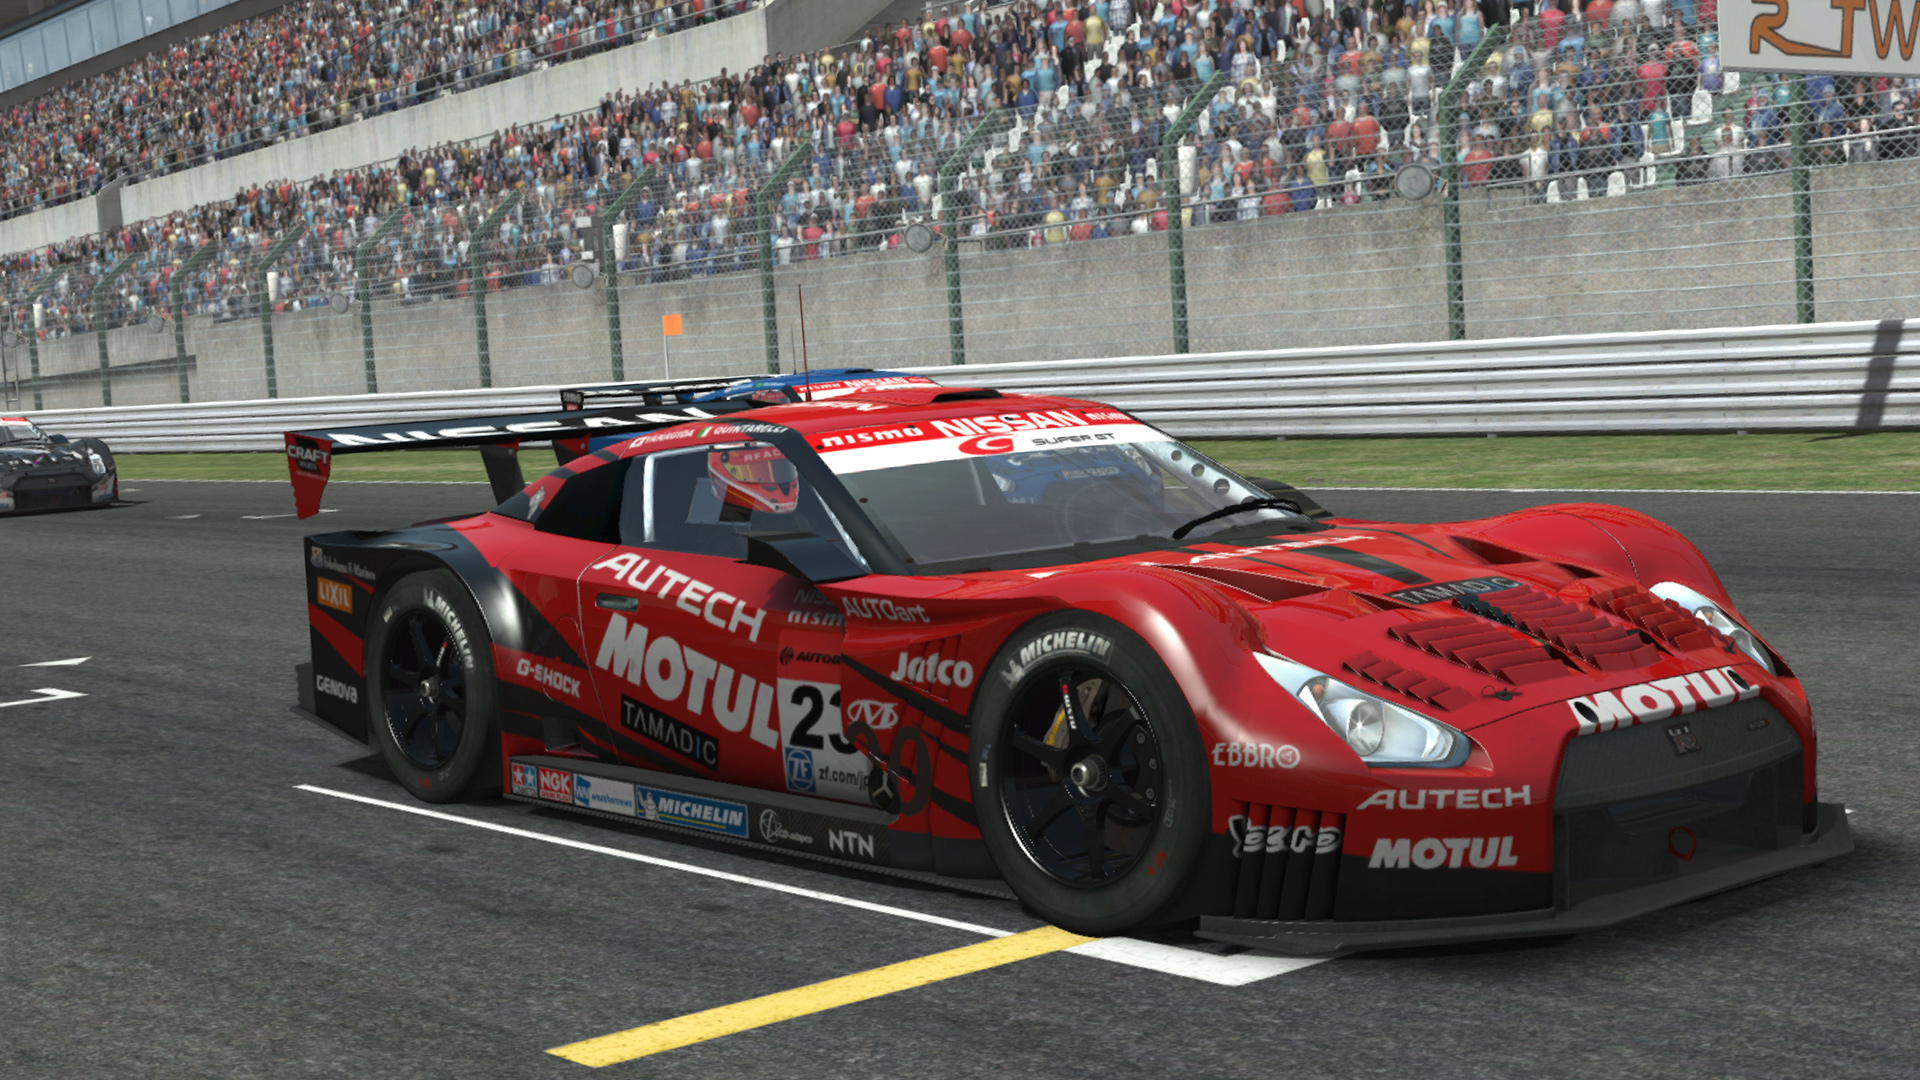 823946118_preview_supergt5.jpg